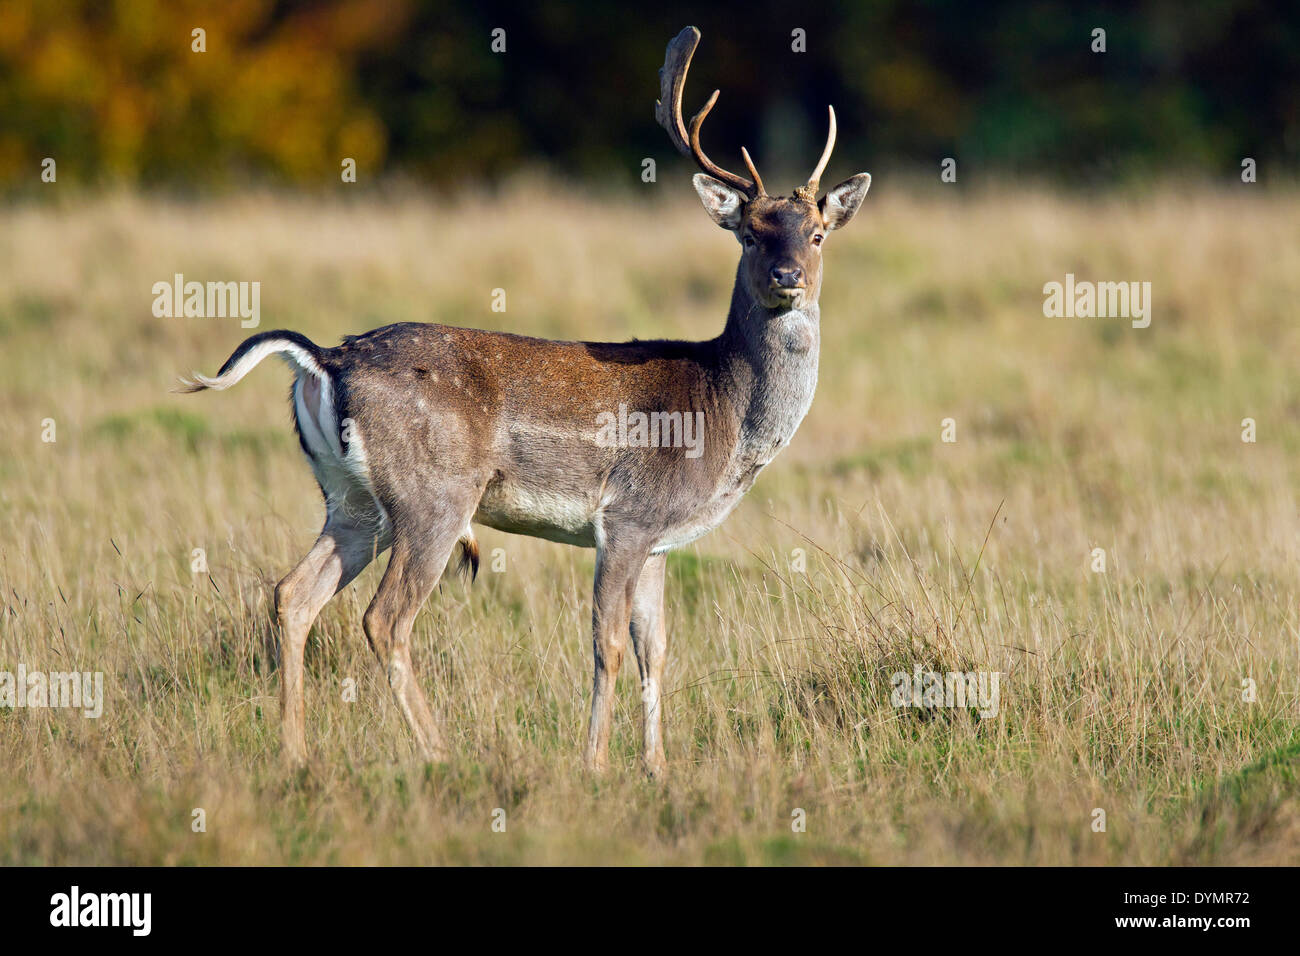 Fallow deer (Dama dama) young buck with deformed antlers during the rut in autumn in grassland Stock Photo